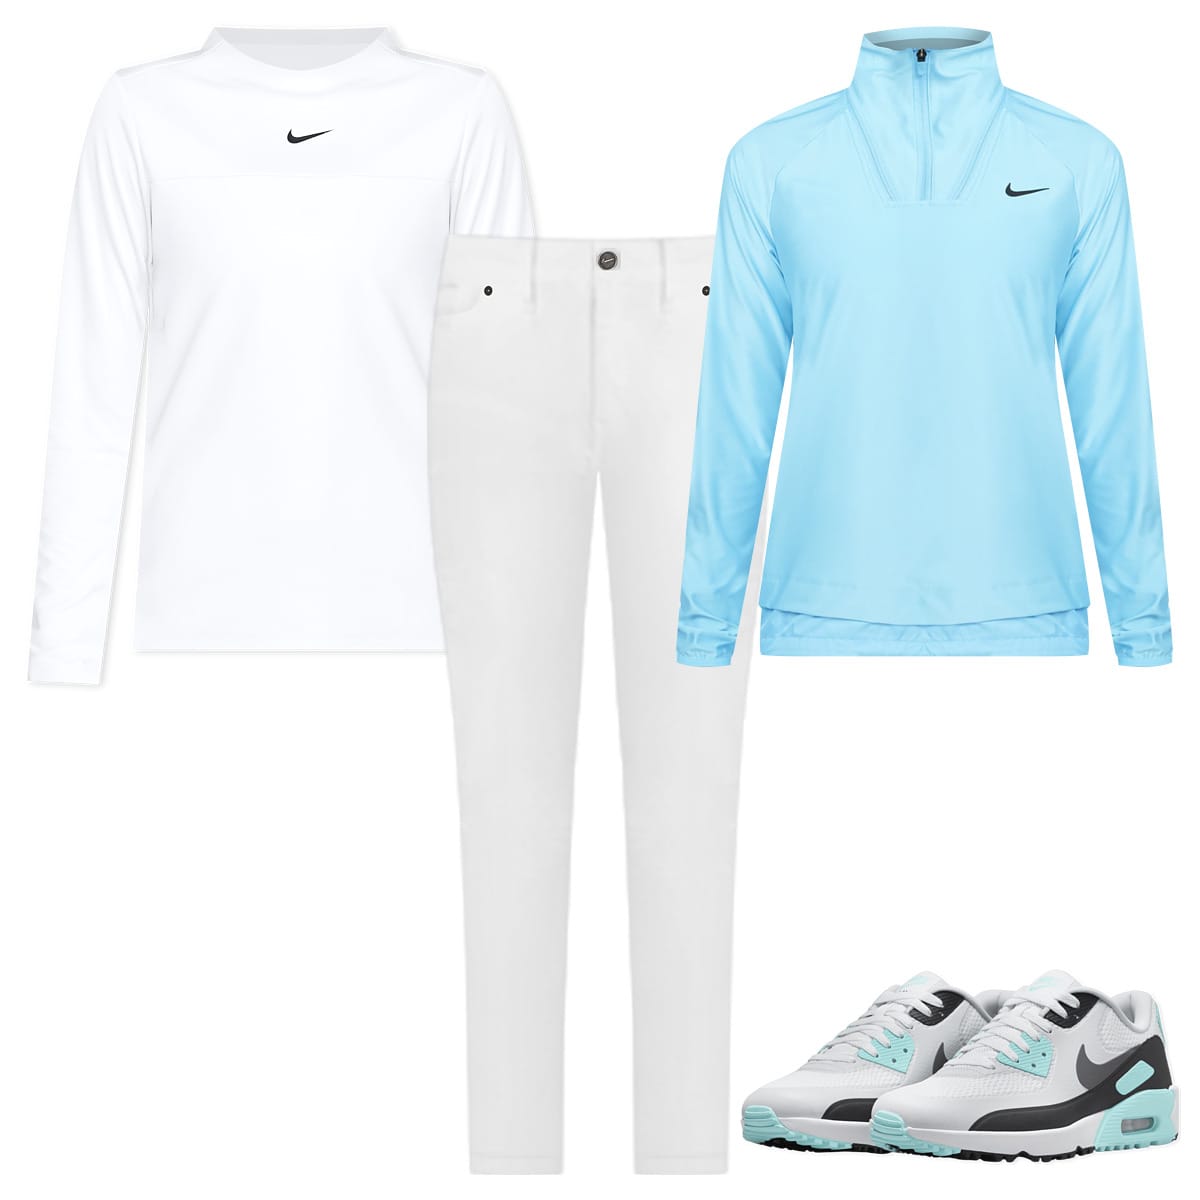 What to Wear for Golf: Chic Golfing Outfits for Women